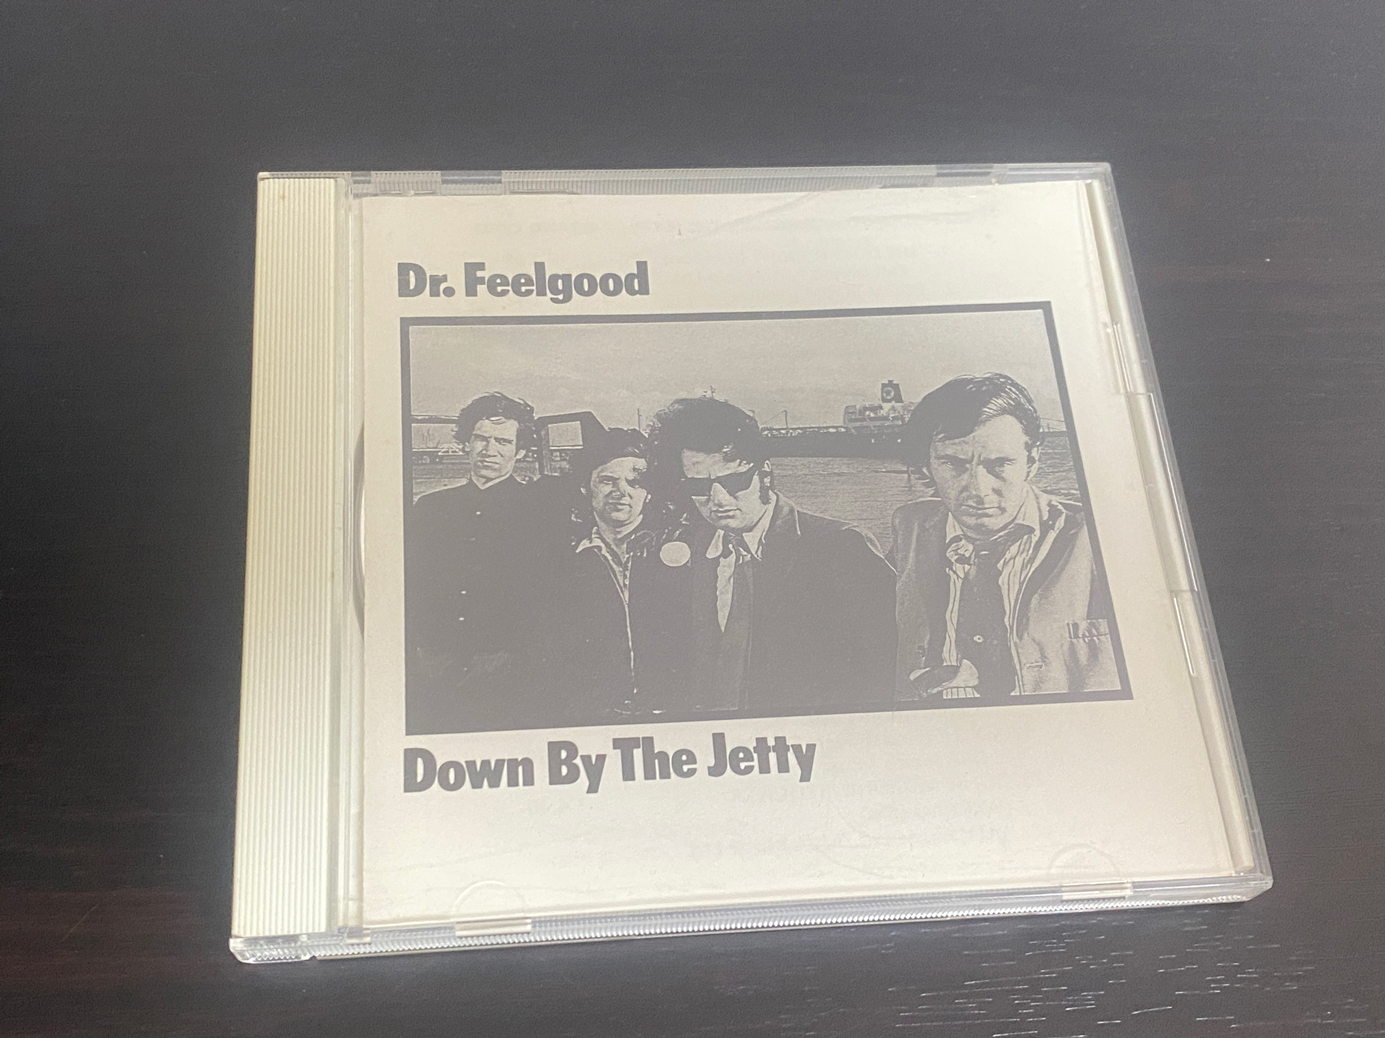 DR. FEELGOOD「Down By The Jetty」のジャケット